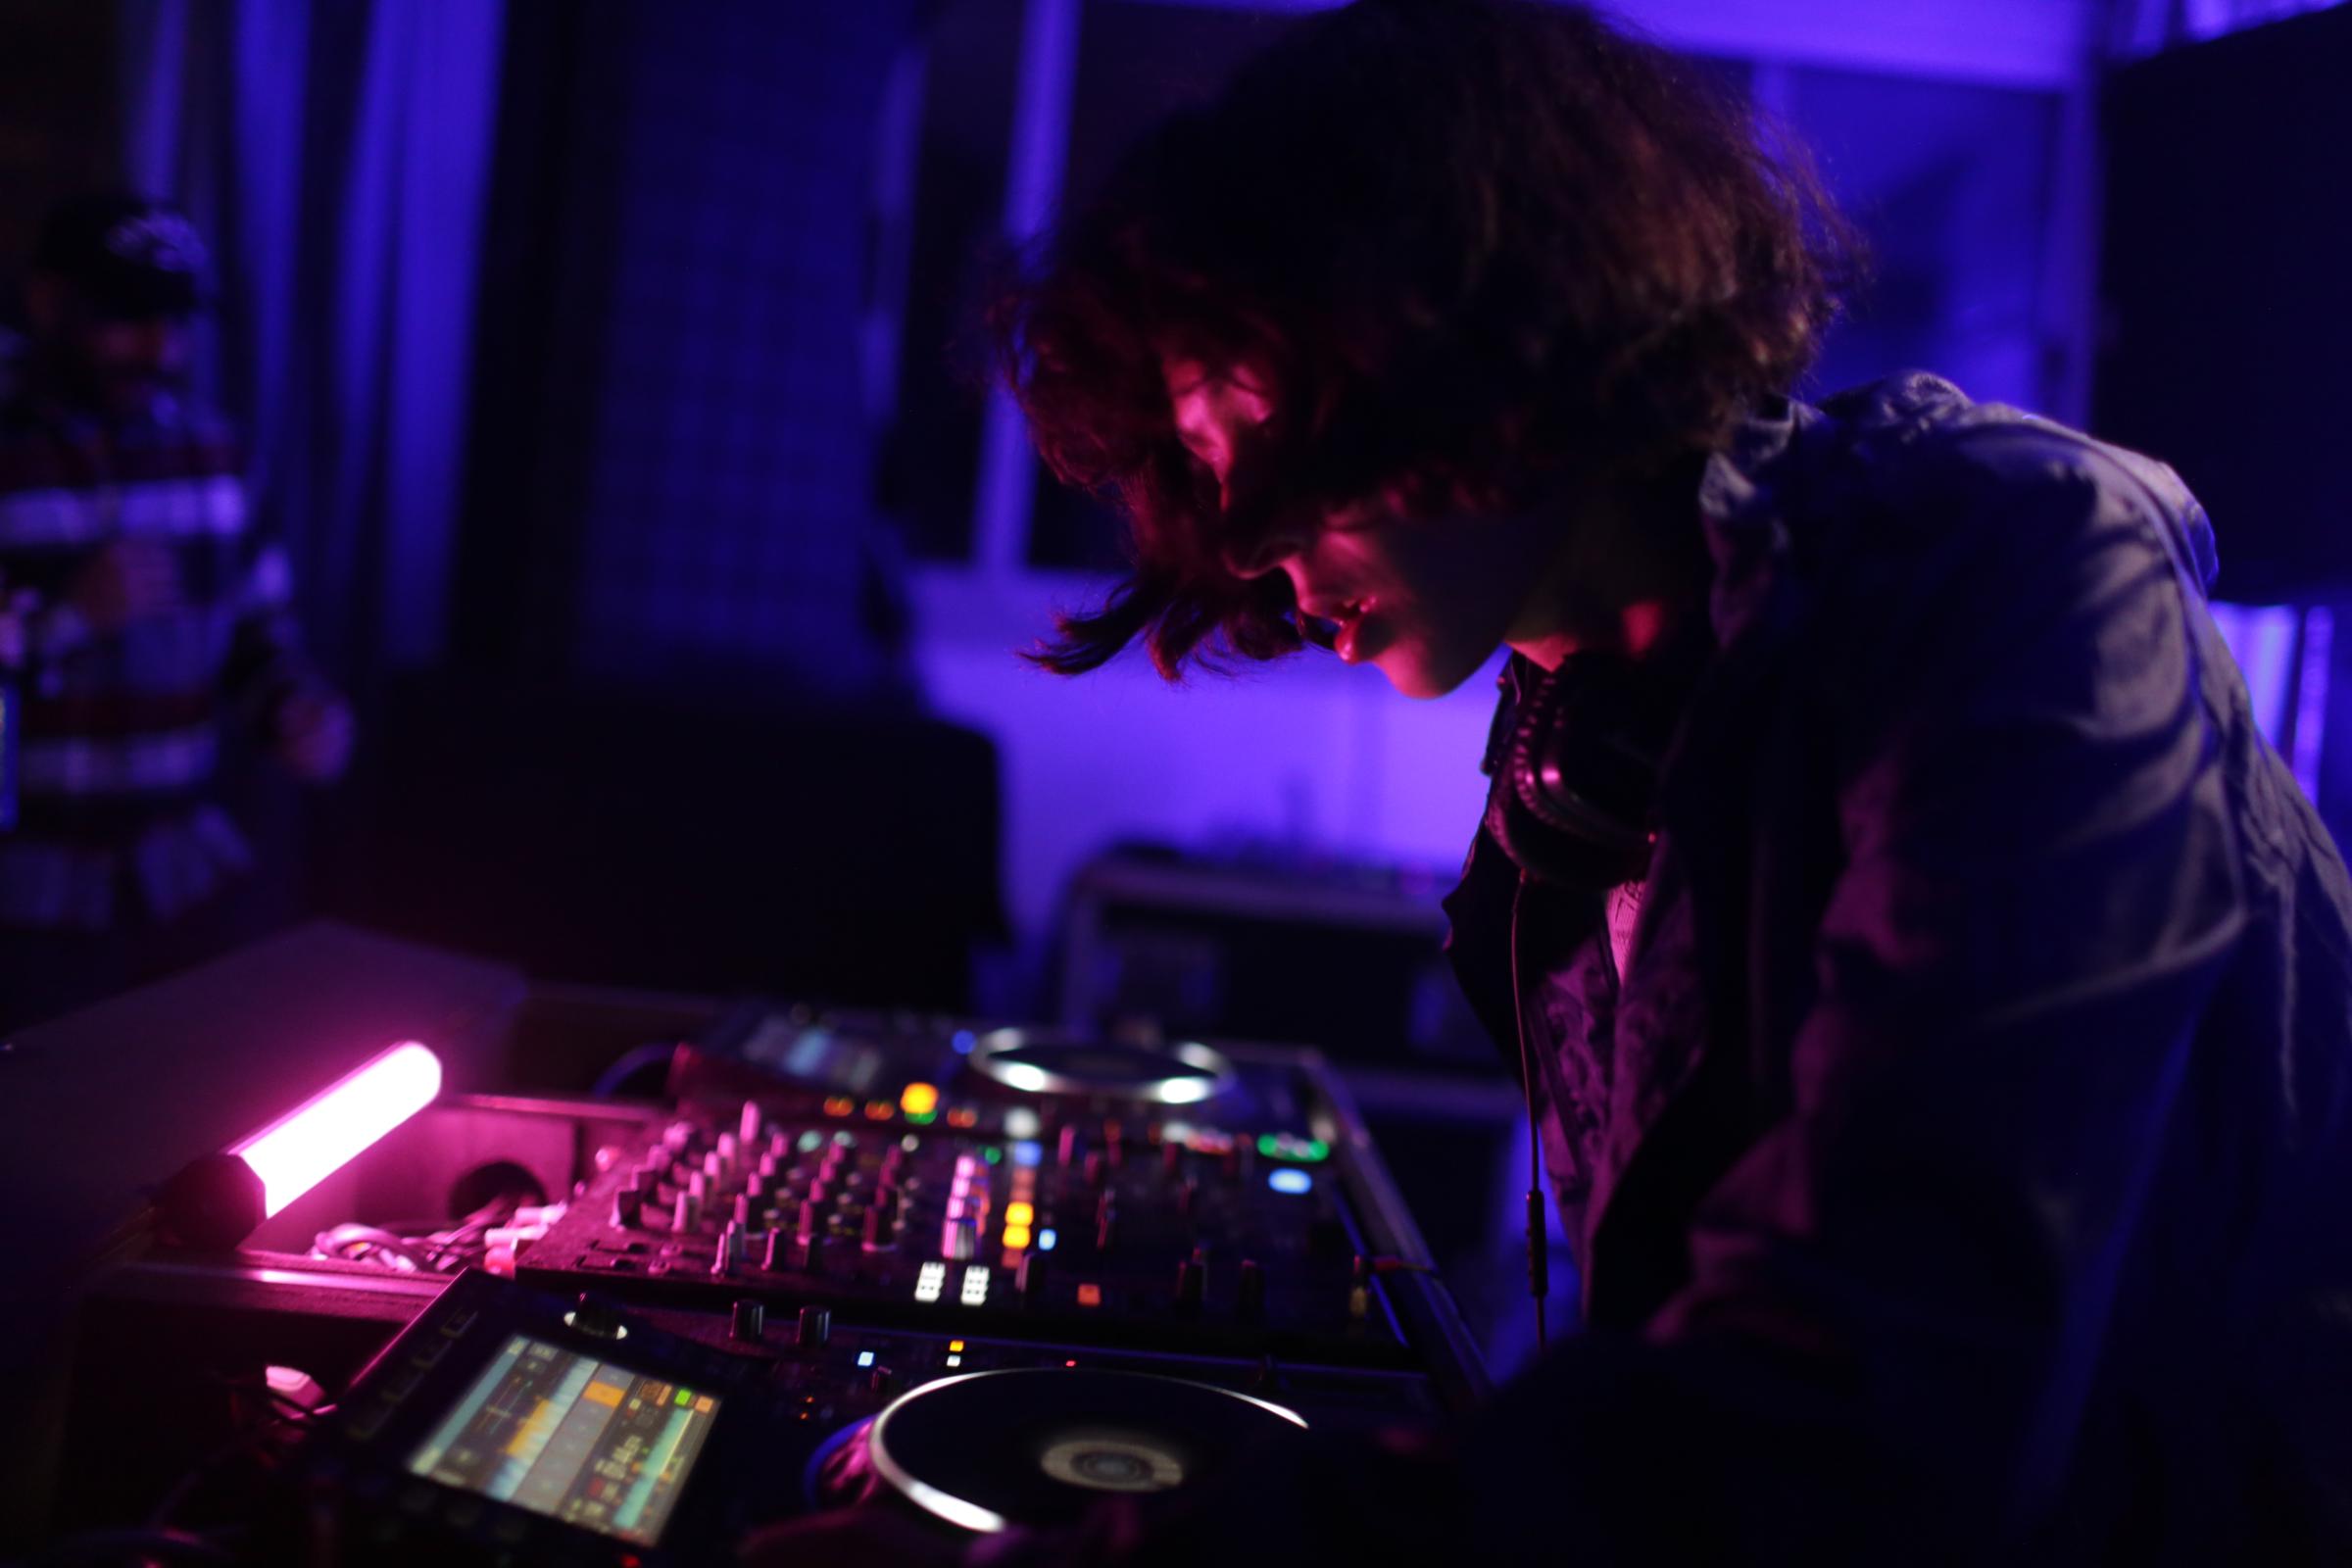 Female DJs navigate Egypt's underground music scene -  Donia Shohdy, or A7ba-L-Jelly, plays music during a...